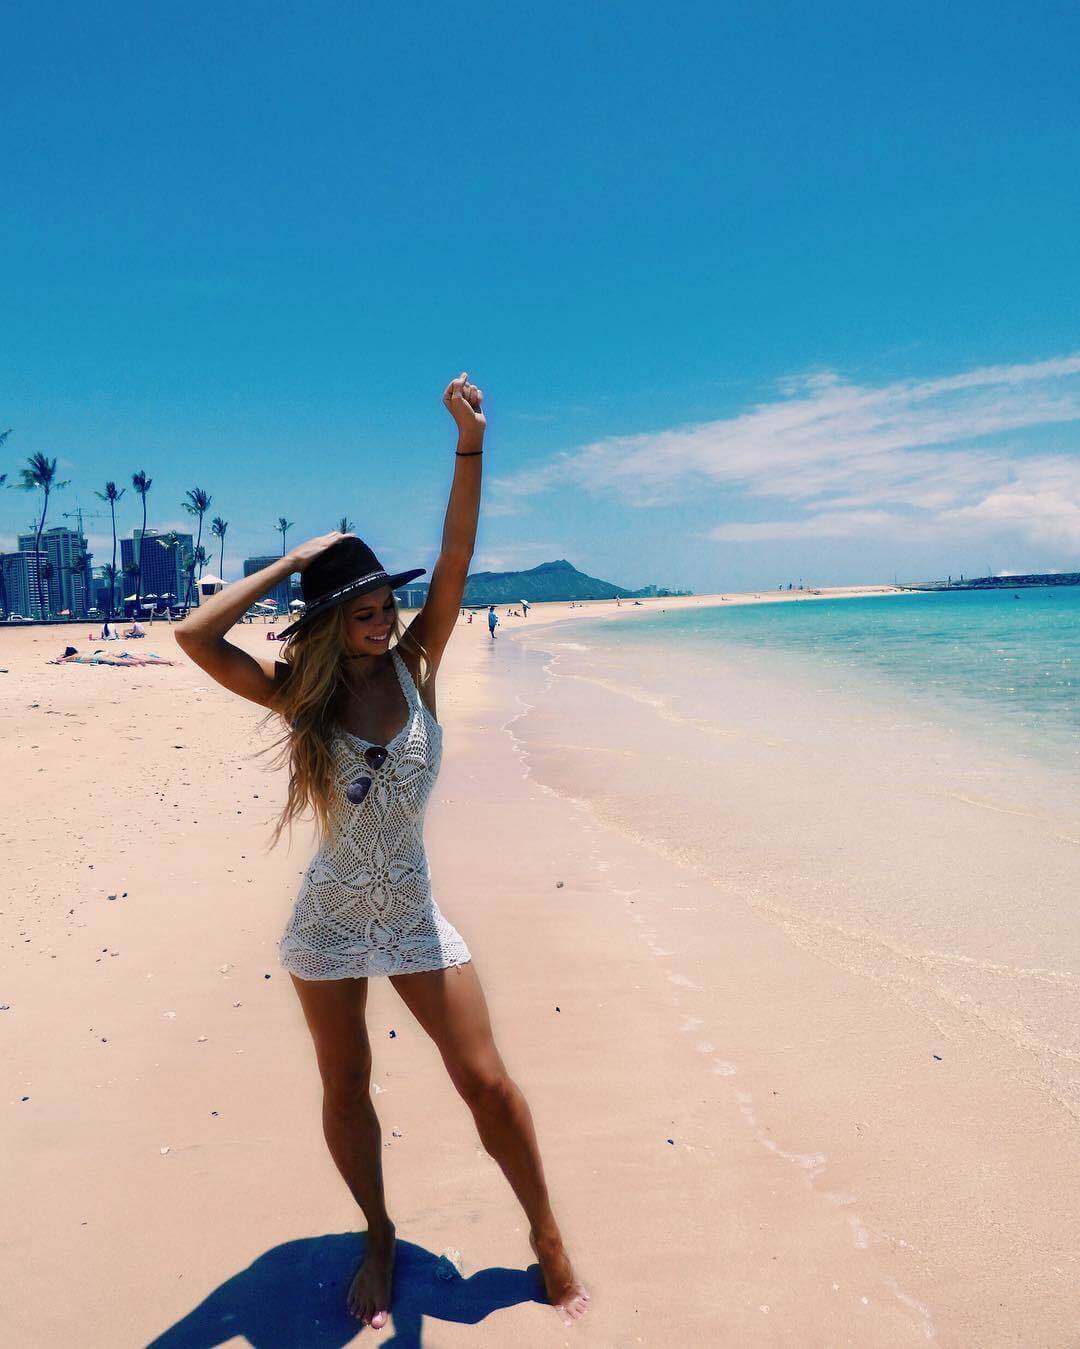 49 Hot Pictures Of Allie DeBerry Are Seriously Epitome Of Beauty | Best Of Comic Books